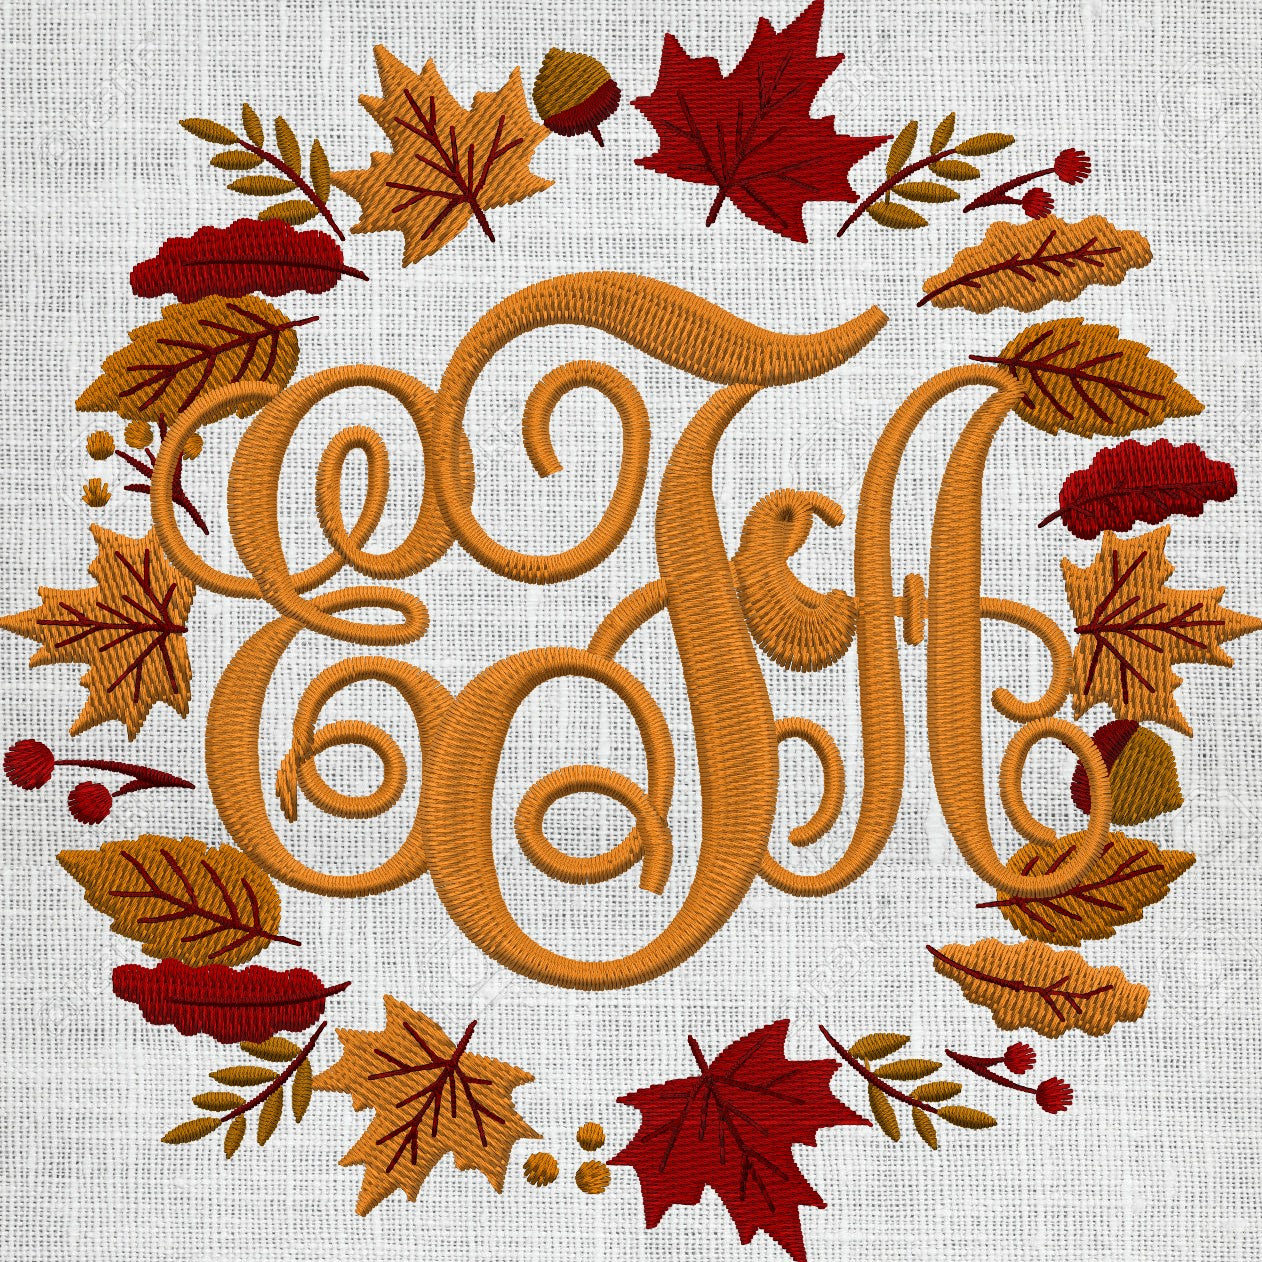 Autumn Wreath Frame with Leaves and Acorns EMBROIDERY DESIGN FILE- Instant download - Hus Exp Jef Vp3 Pes Dst formats 2 sizes 5 colors